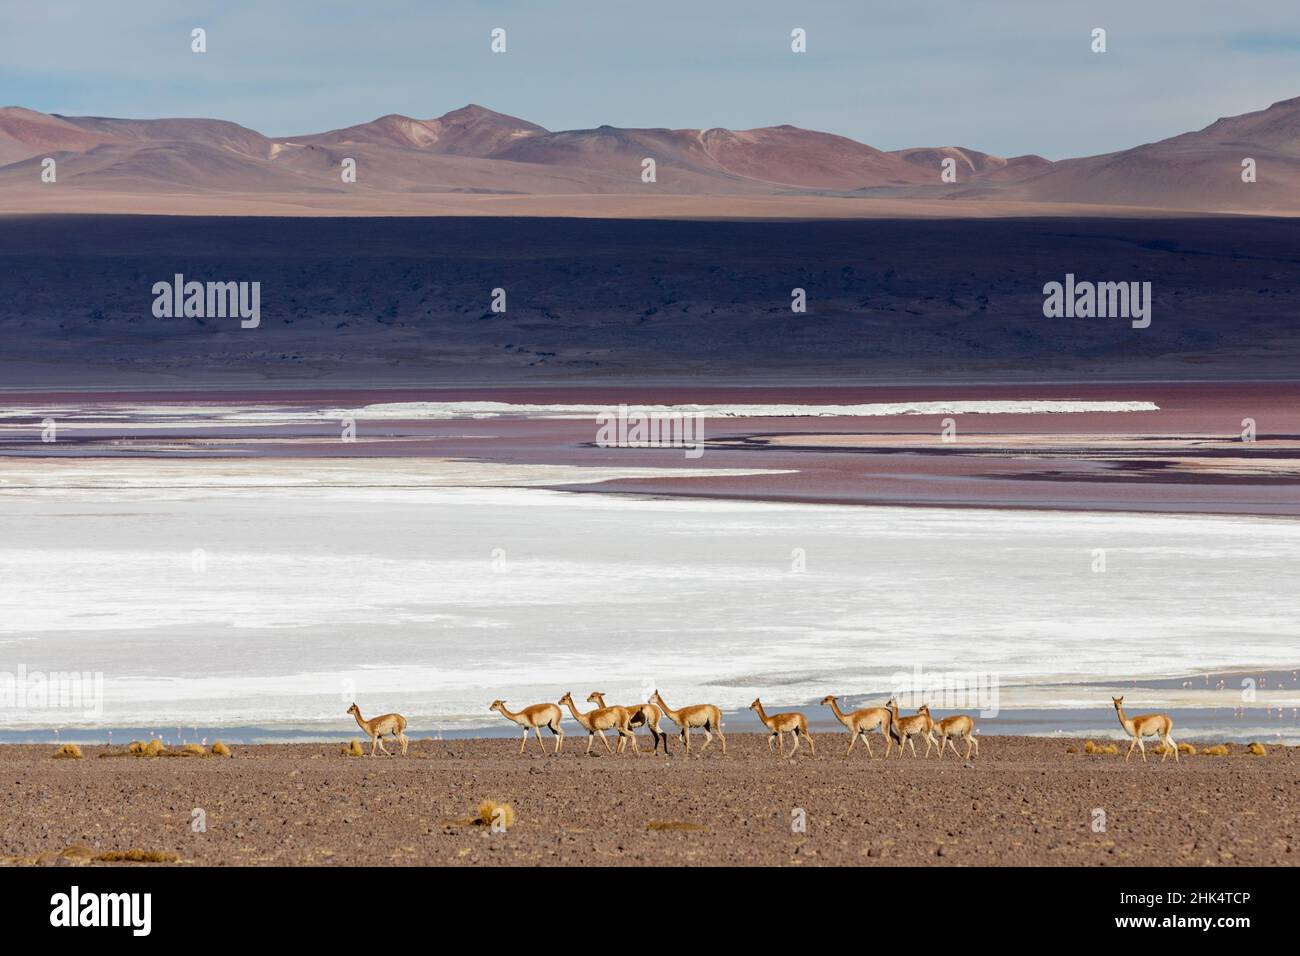 A herd of vicunas (Lama vicugna) in the altiplano of the high Andes Mountains, Bolivia, South America Stock Photo